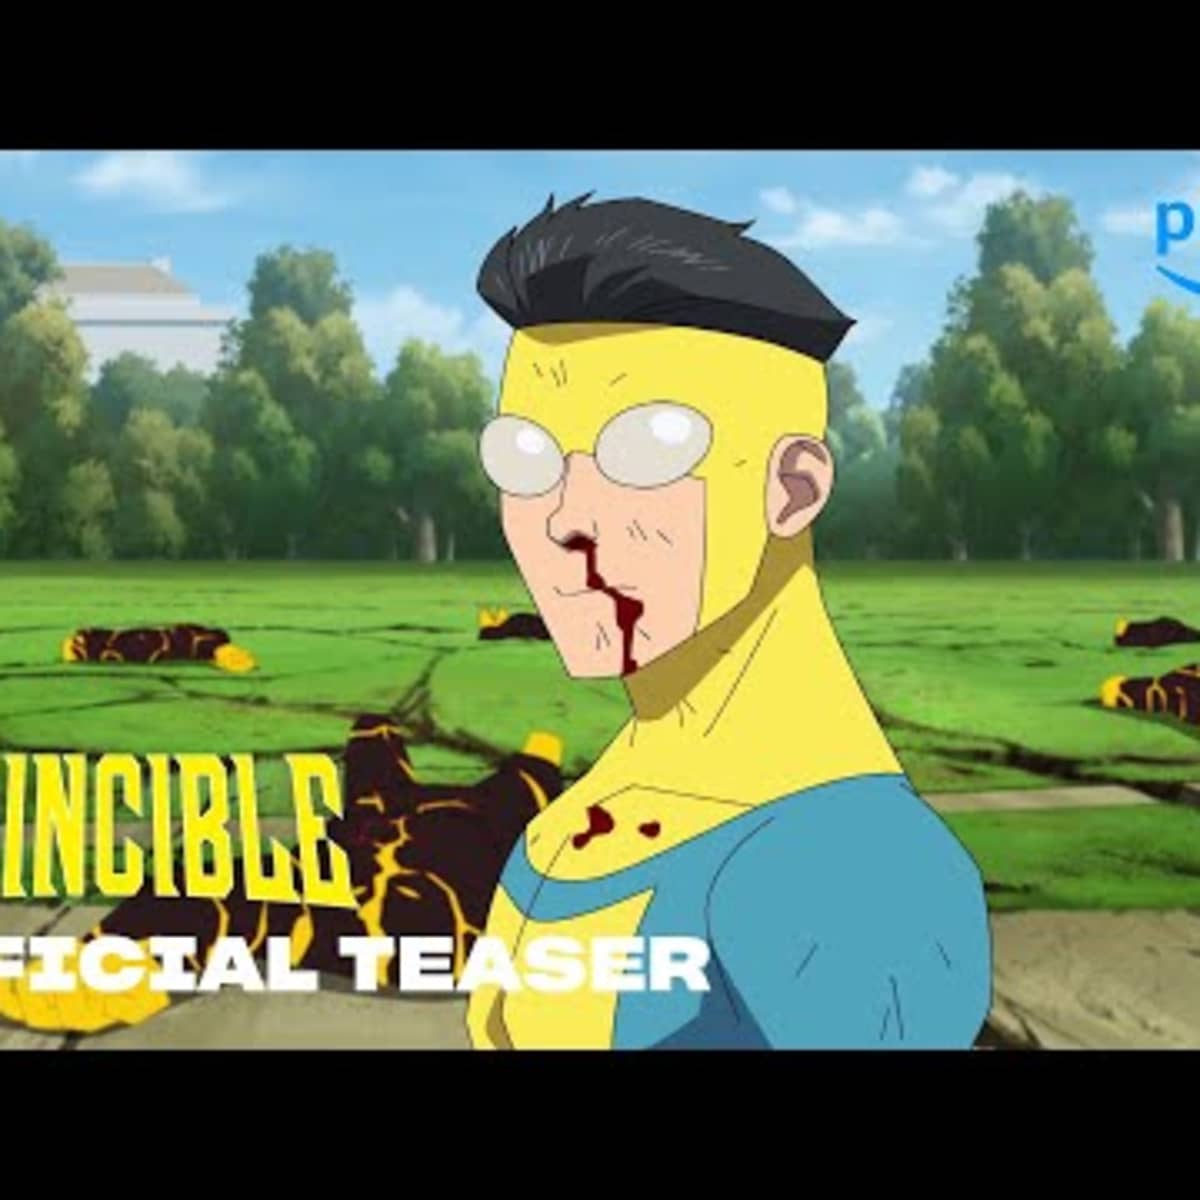 They Did [Them] So Dirty: Invincible Season 2's Big Death Sparks